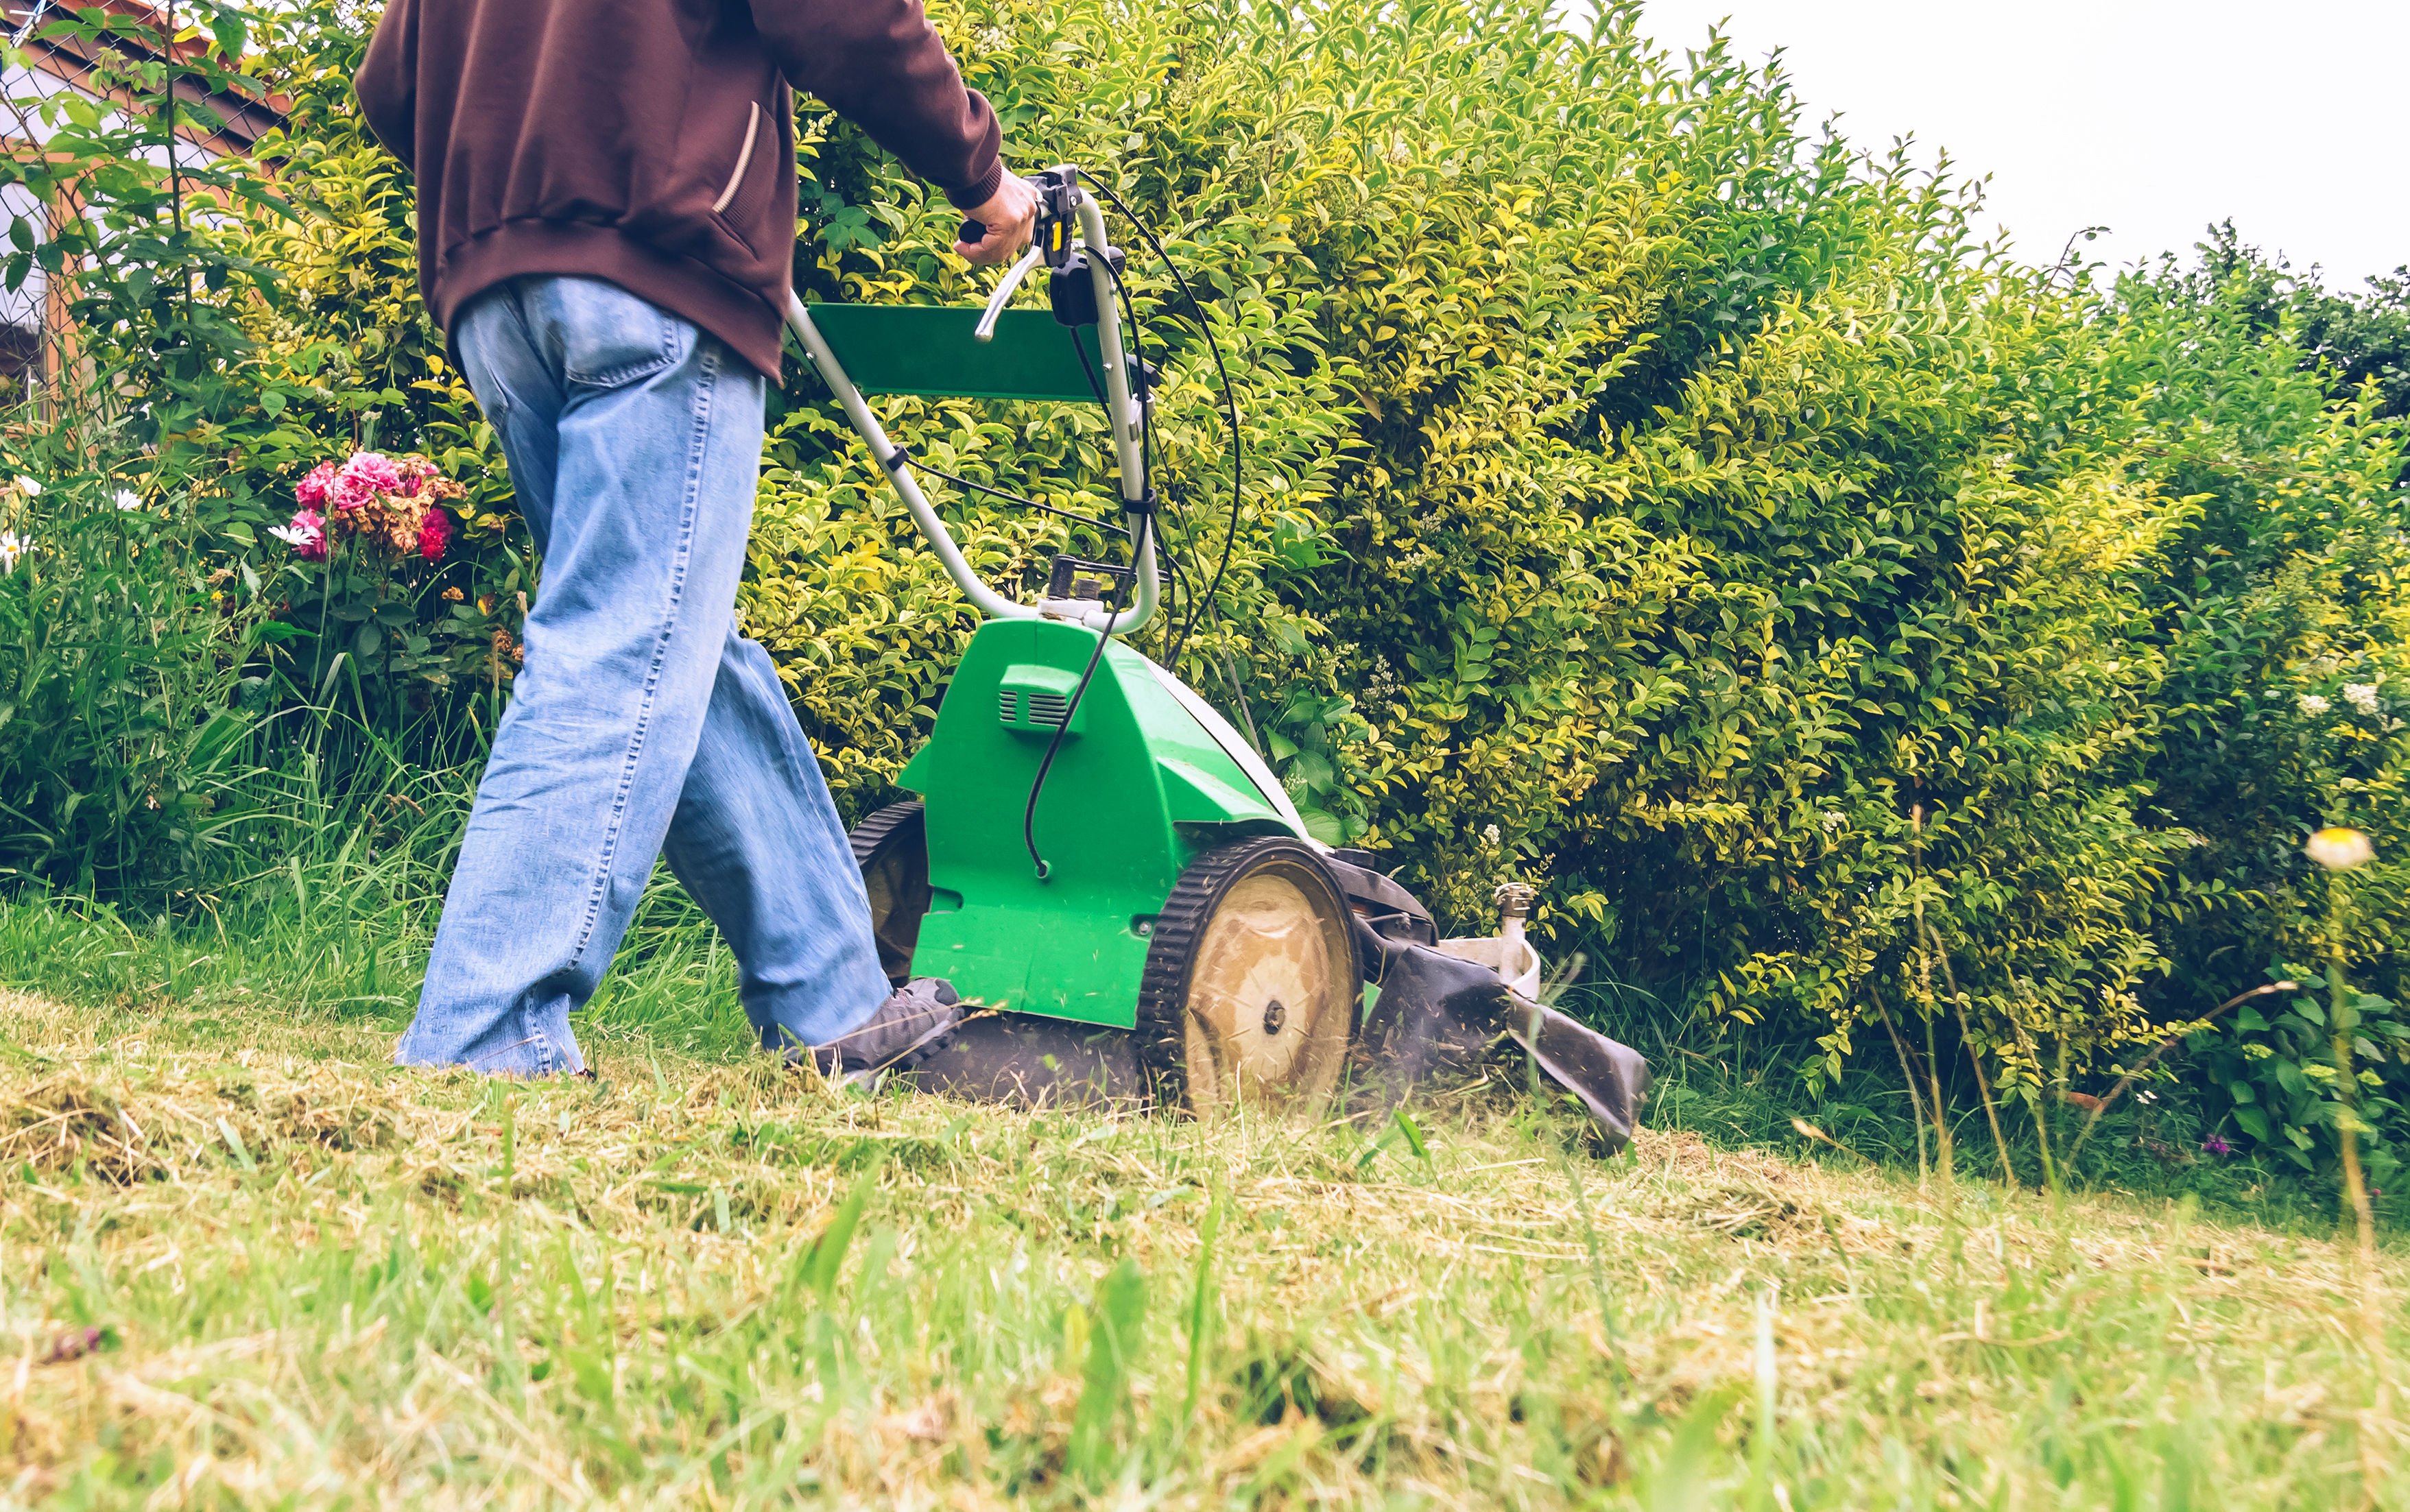 A close-up photograph of an elderly man wearing a cap, operating a lawnmower machine in a field or a large lawn, possibly in a rural or suburban setting